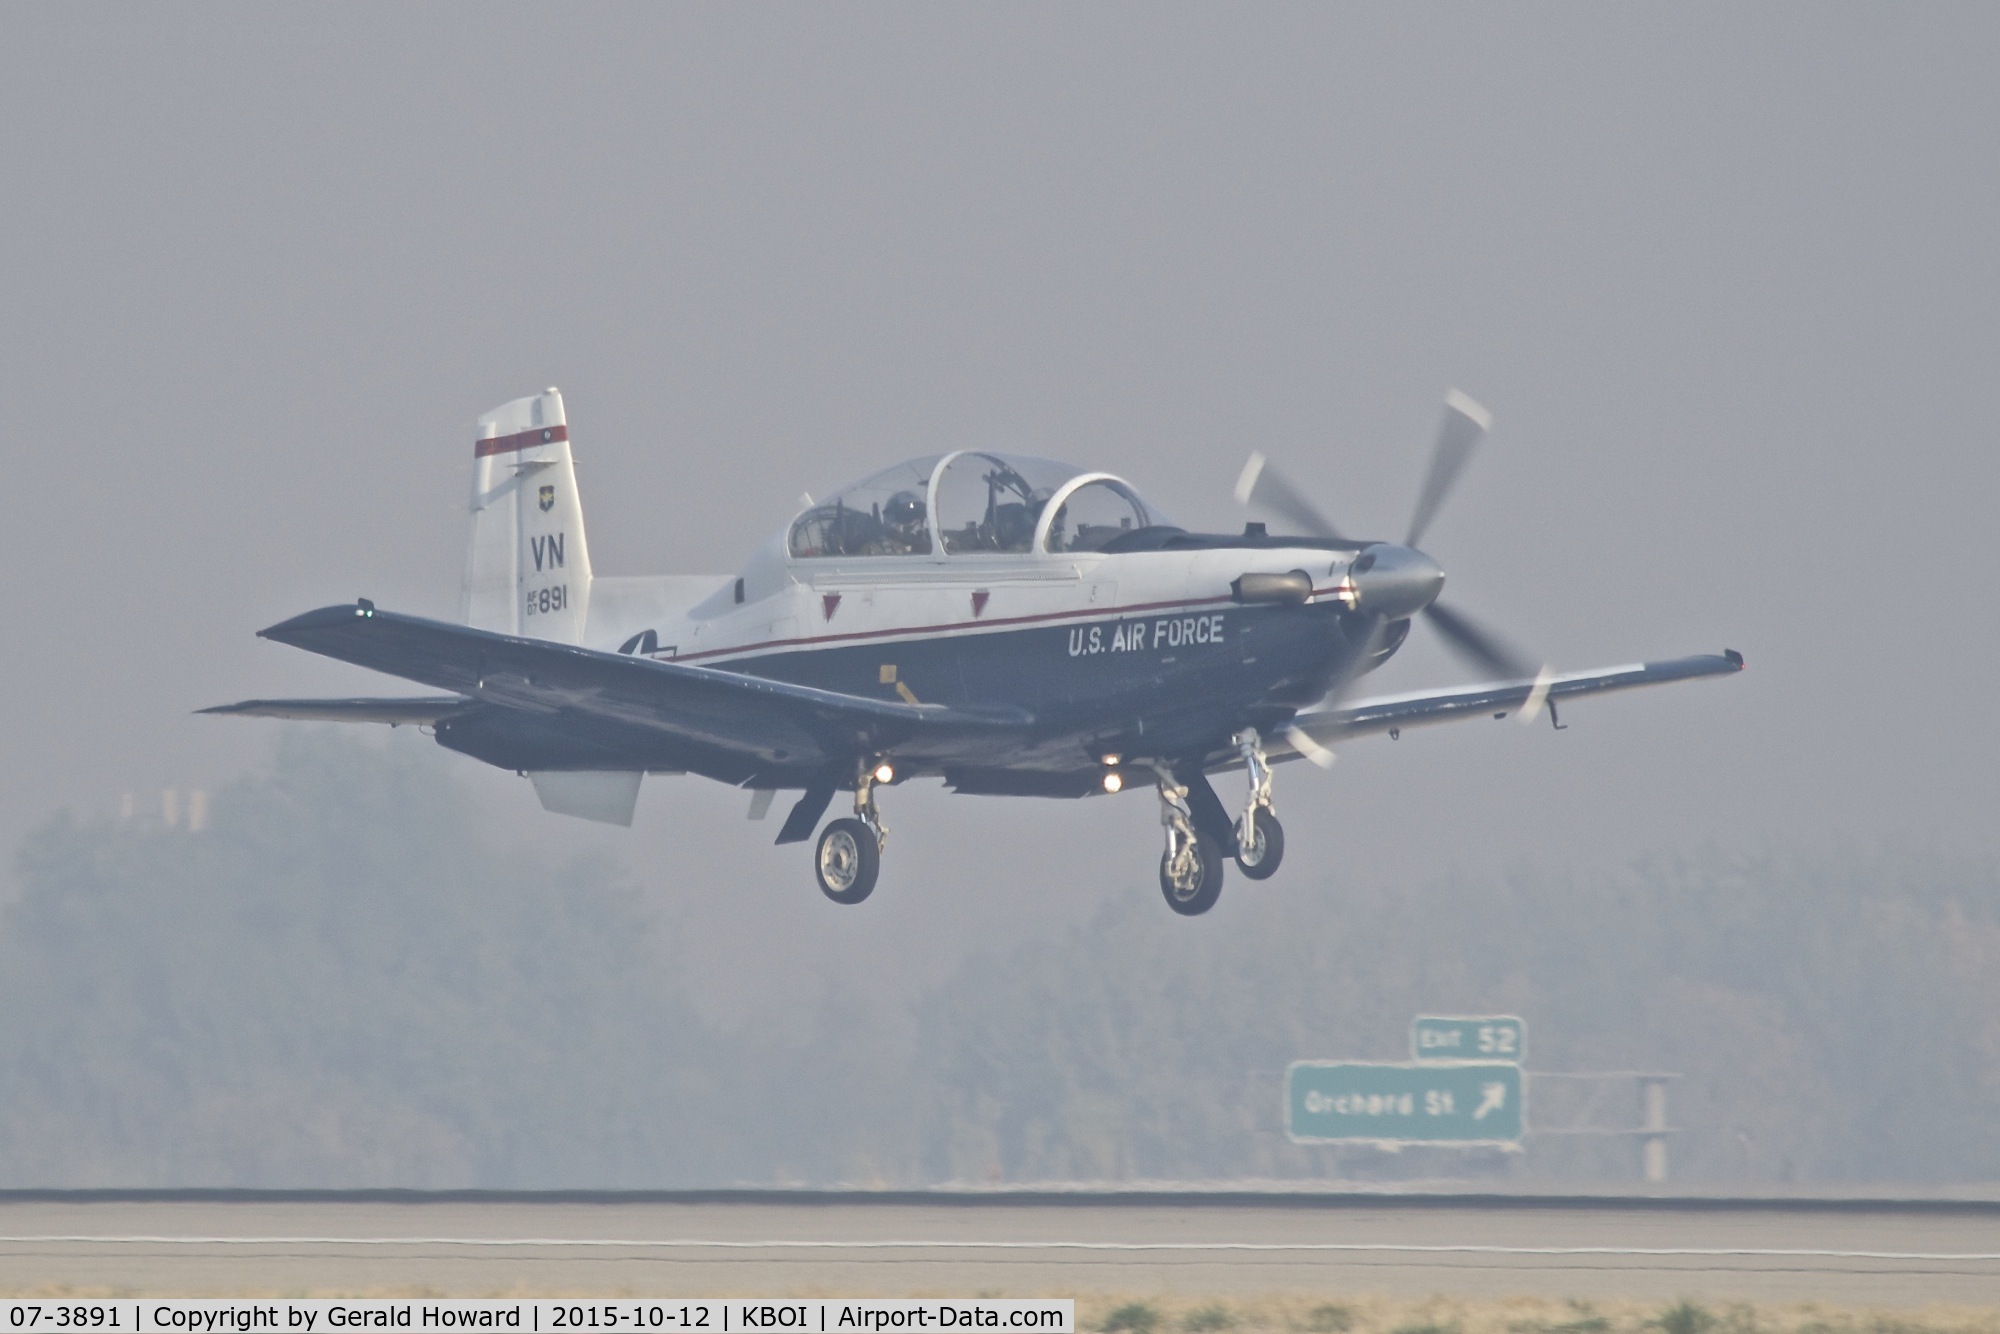 07-3891, 2007 Raytheon T-6A Texan II C/N PT-446, Taking off from RWY 10R in IFR smoke conditions. 71st Flying Training Wing, 8th Flying Training Squadron  “8 Ballers”, Vance AFB, OK.